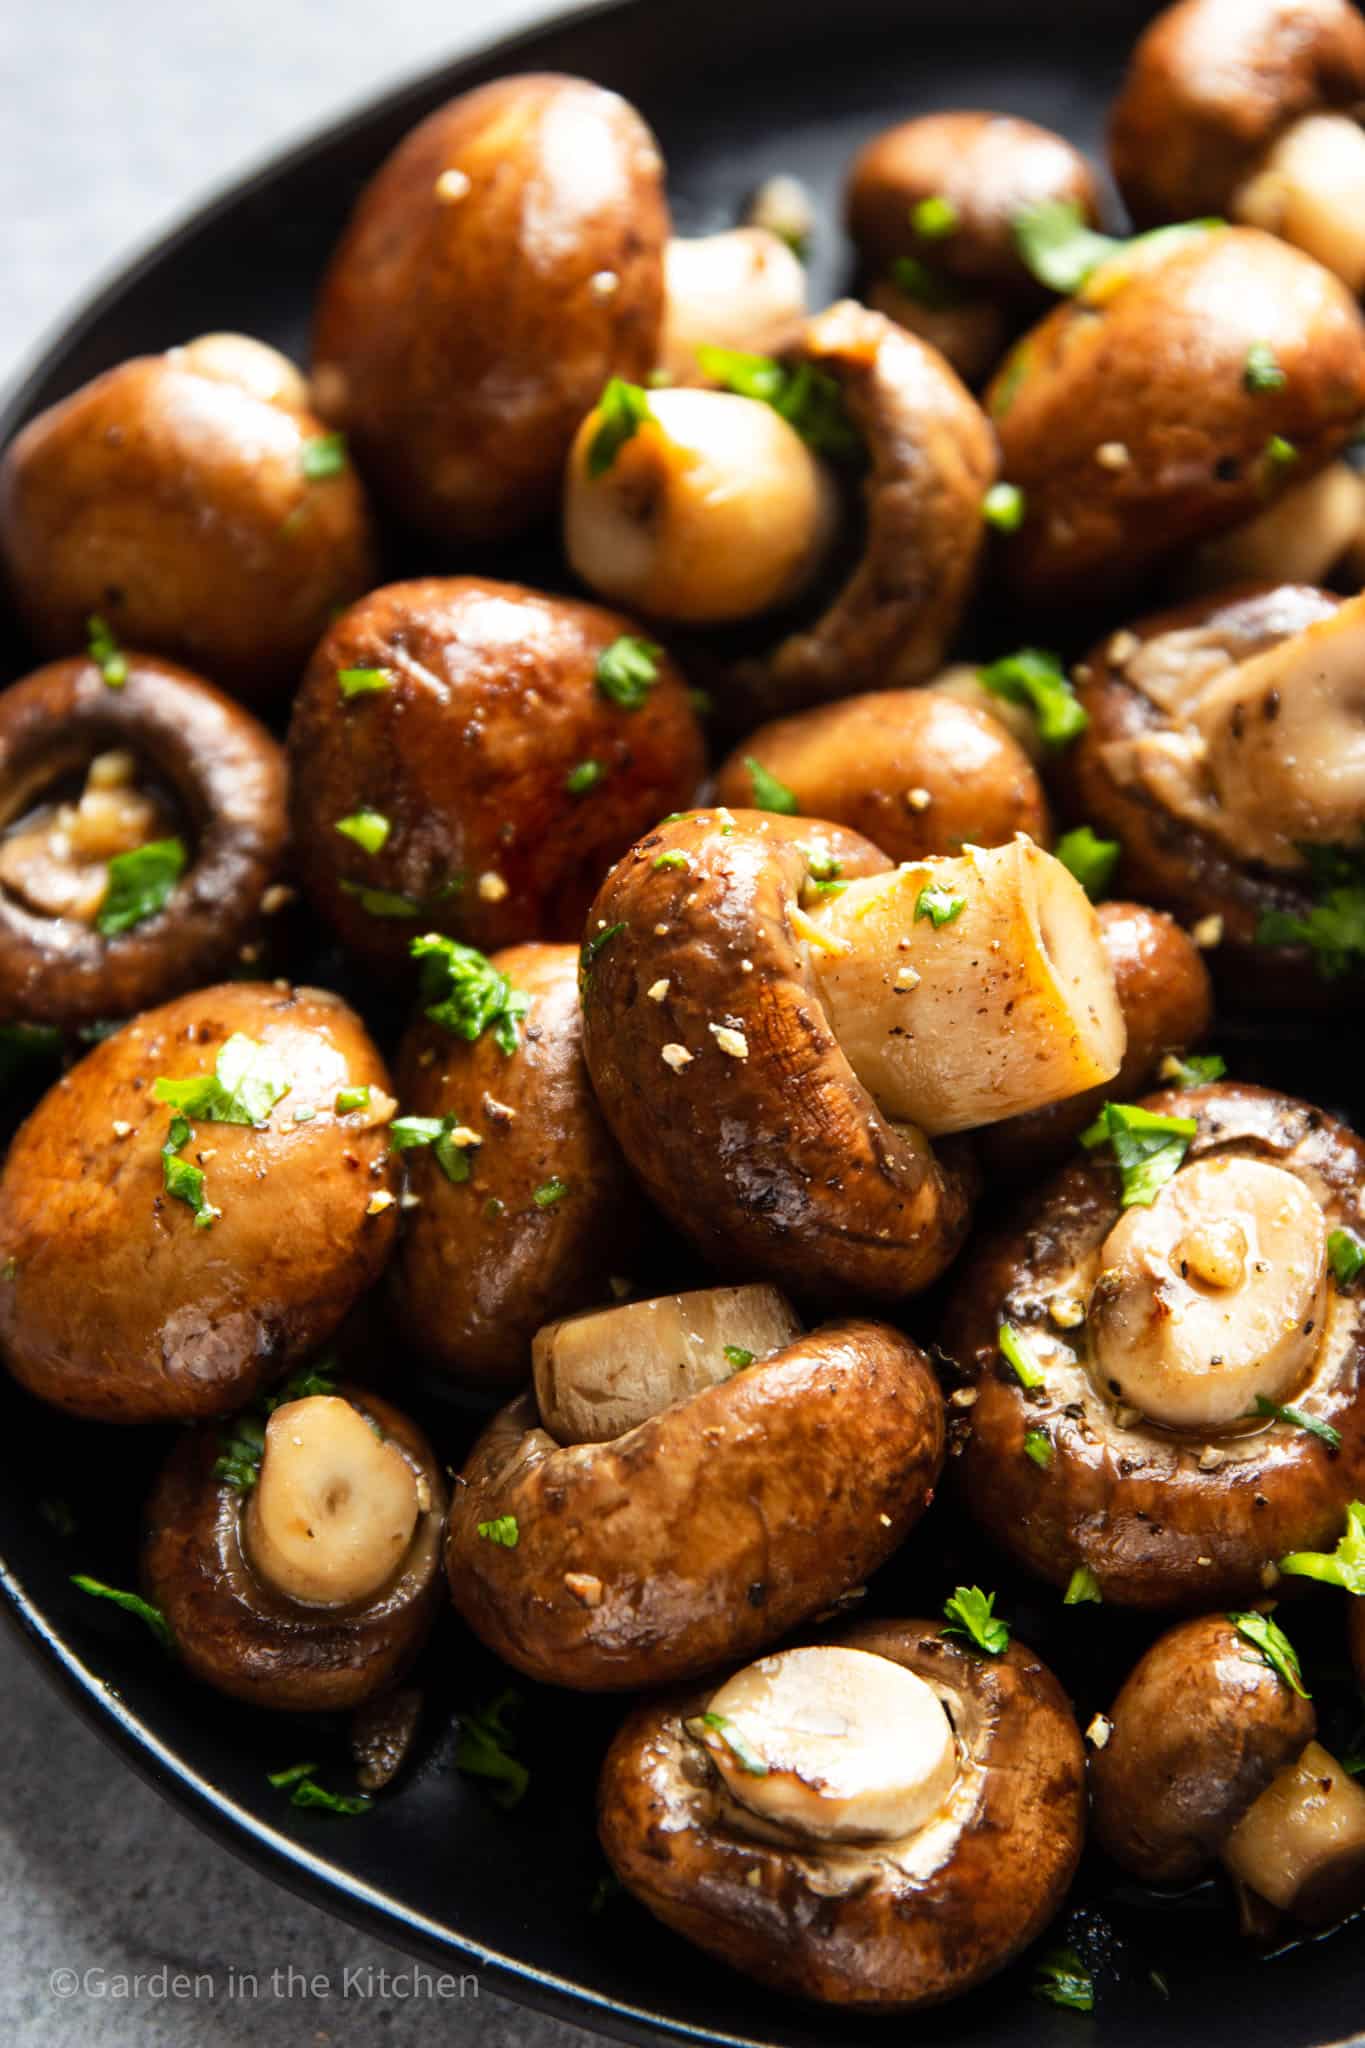 Close up image of cremini mushrooms cooked in garlic butter sauce. Mushrooms are garnished with fresh cilantro.